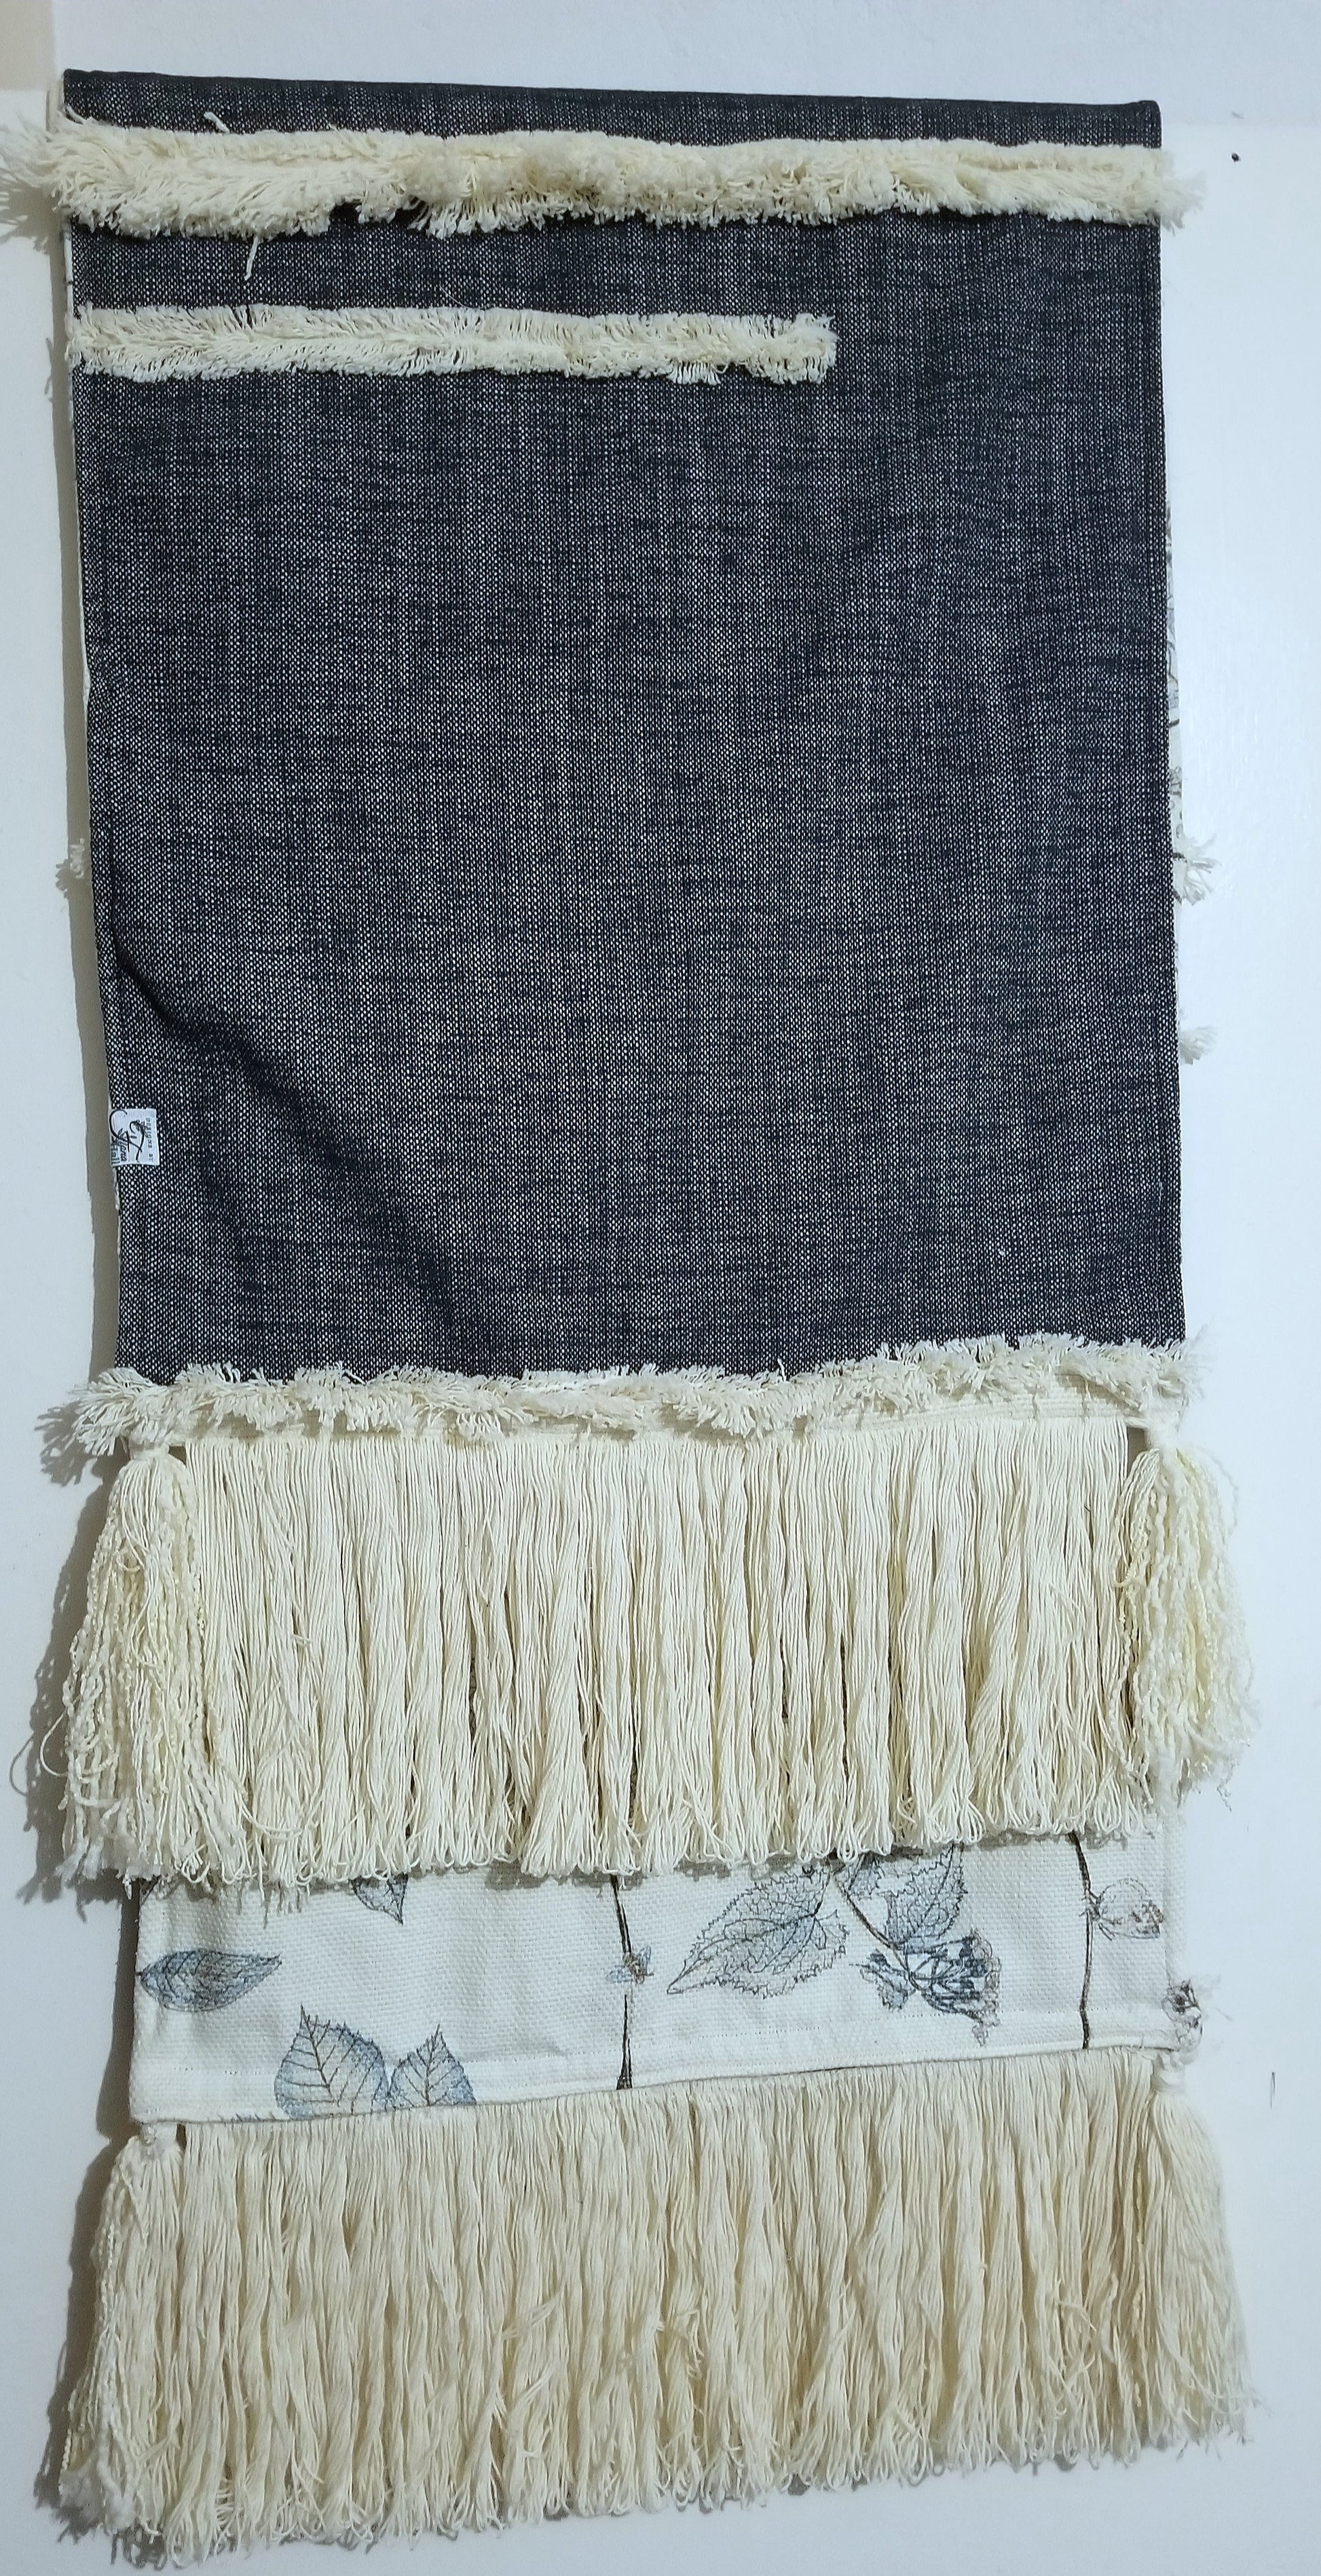 Bring effortless style to your home with this handmade limited edition luxury throw/runner. Woven in an intricate pattern of beige, black and blue, this 18x70 in piece is made from P Kaufmann Arboretum Fabric, with a woven reverse and tasseled edge. A truly unique piece for the boho decor enthusiast.  Free international shipping